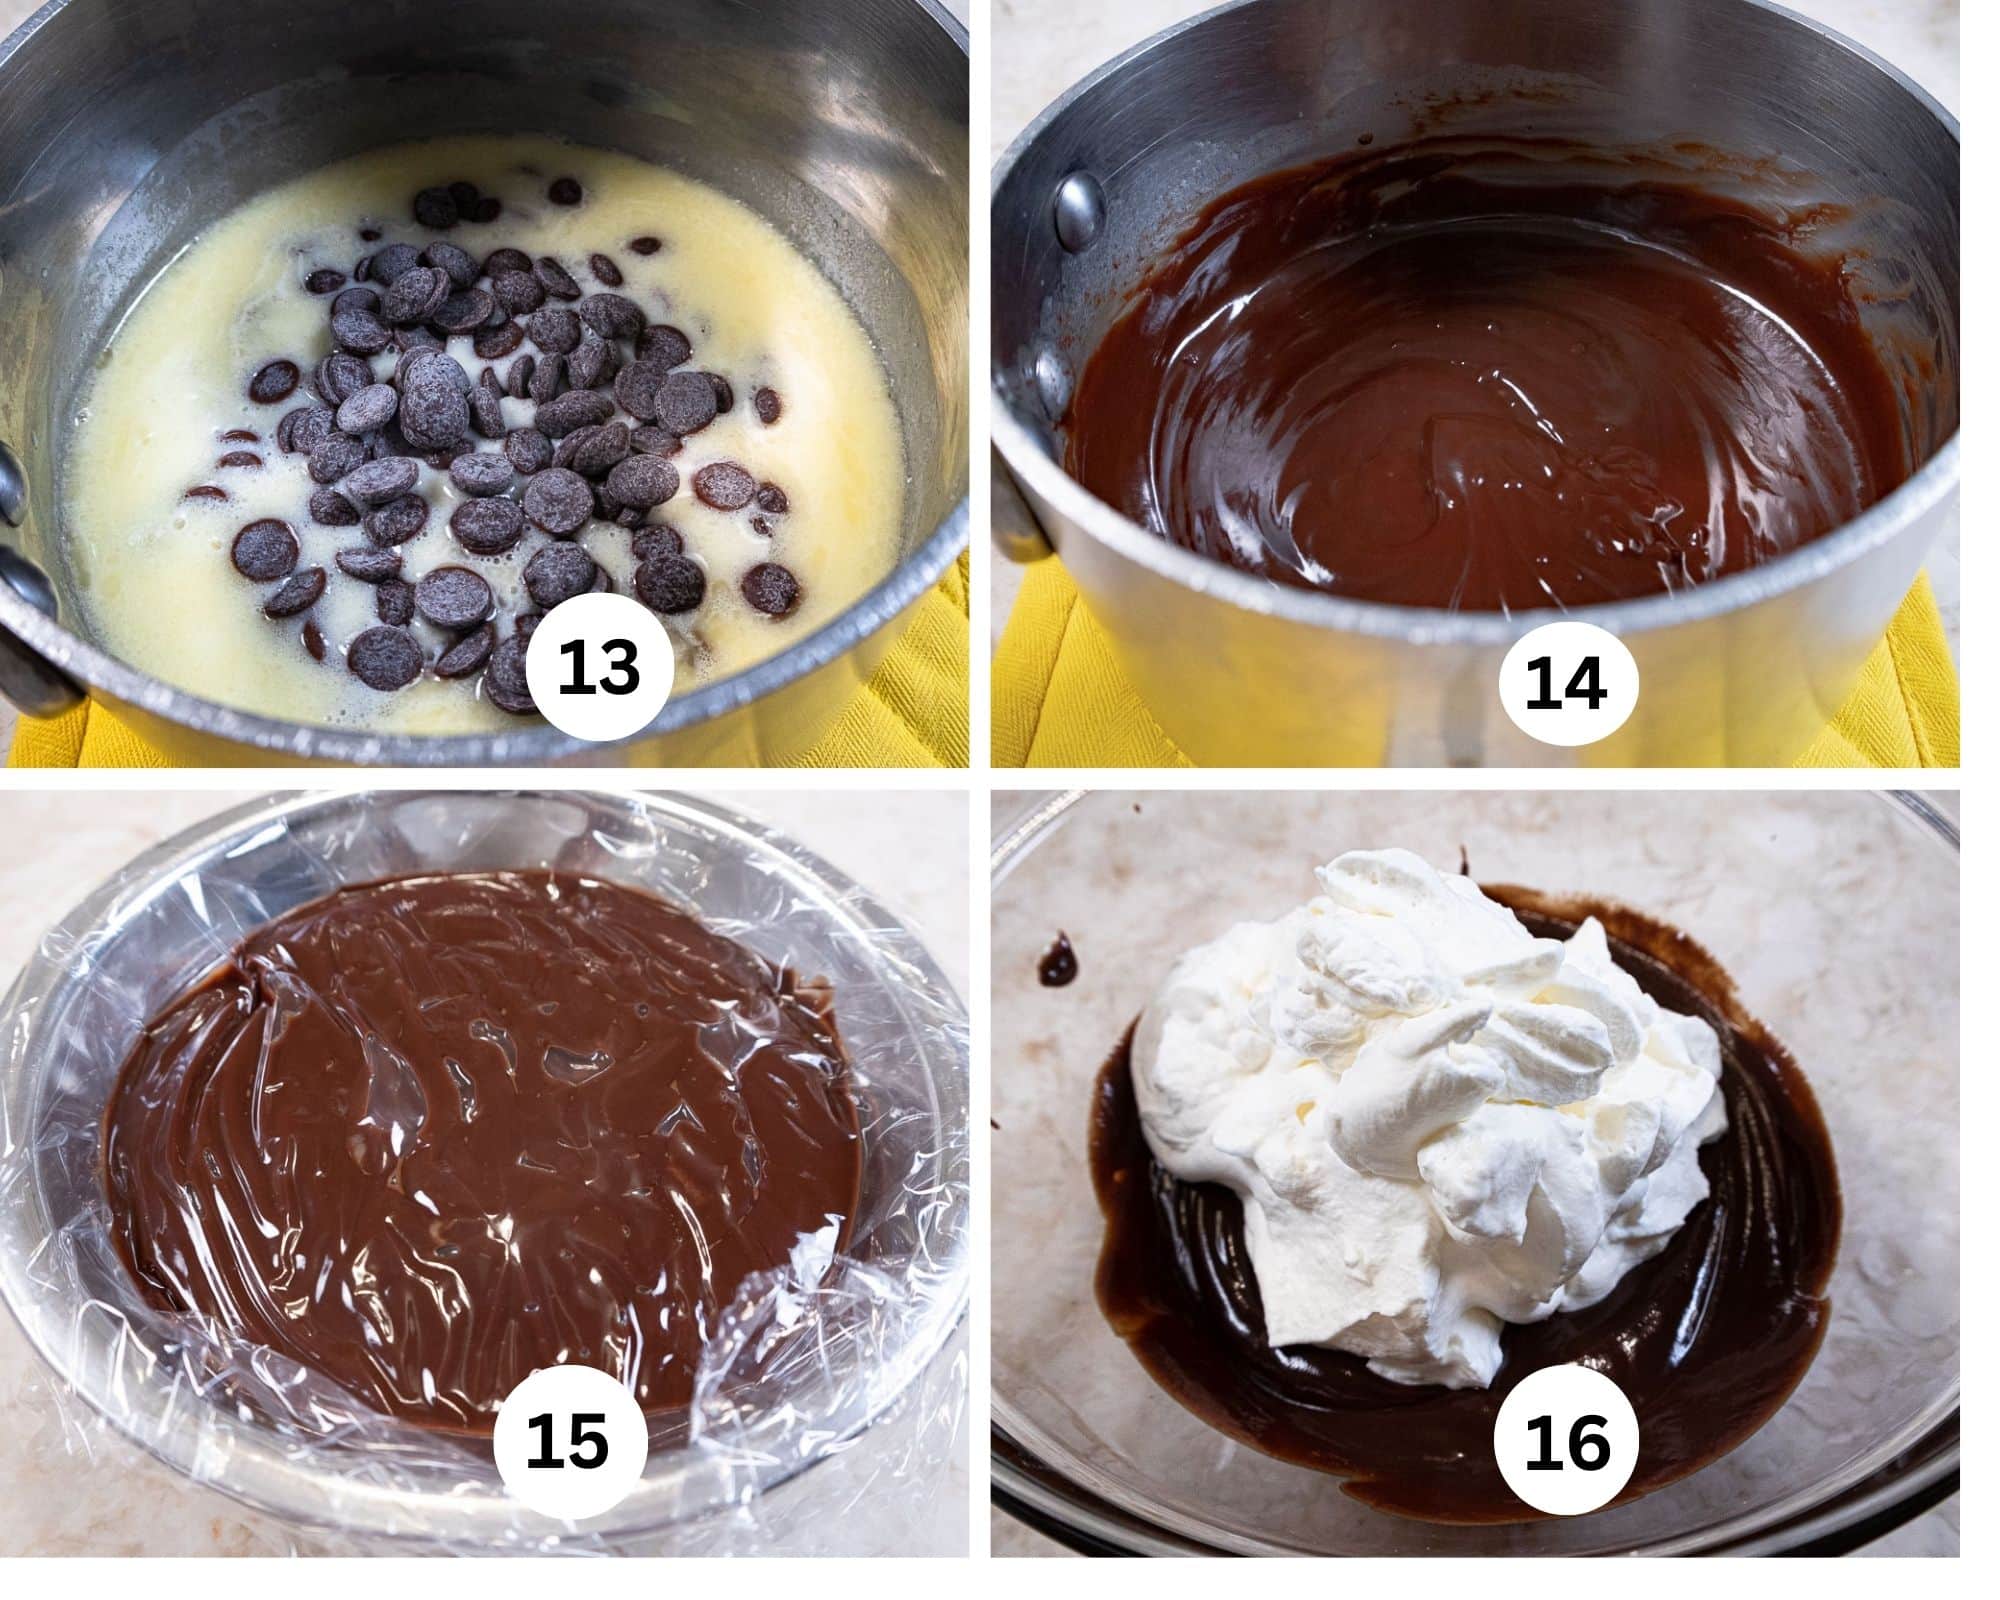 The fourth collage shows the chocolate added to the hot cream, then whisked until smooth, poured into a bowl and covered until cool with whipped cream being added.